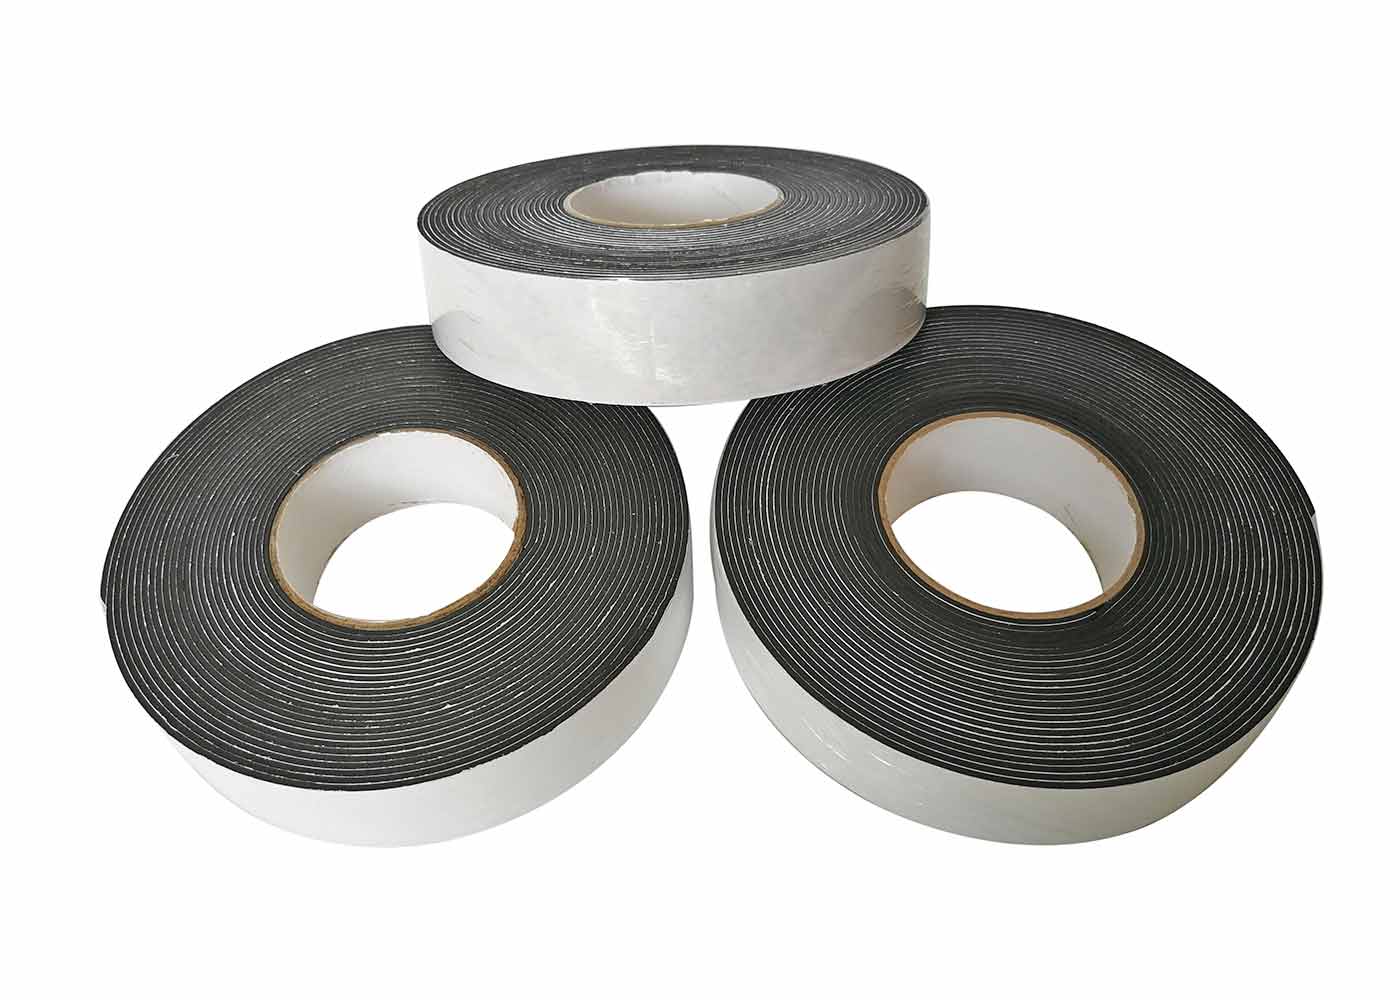 Single Sided EVA Foam Tape Great Weather Stripping For Doors And Windows